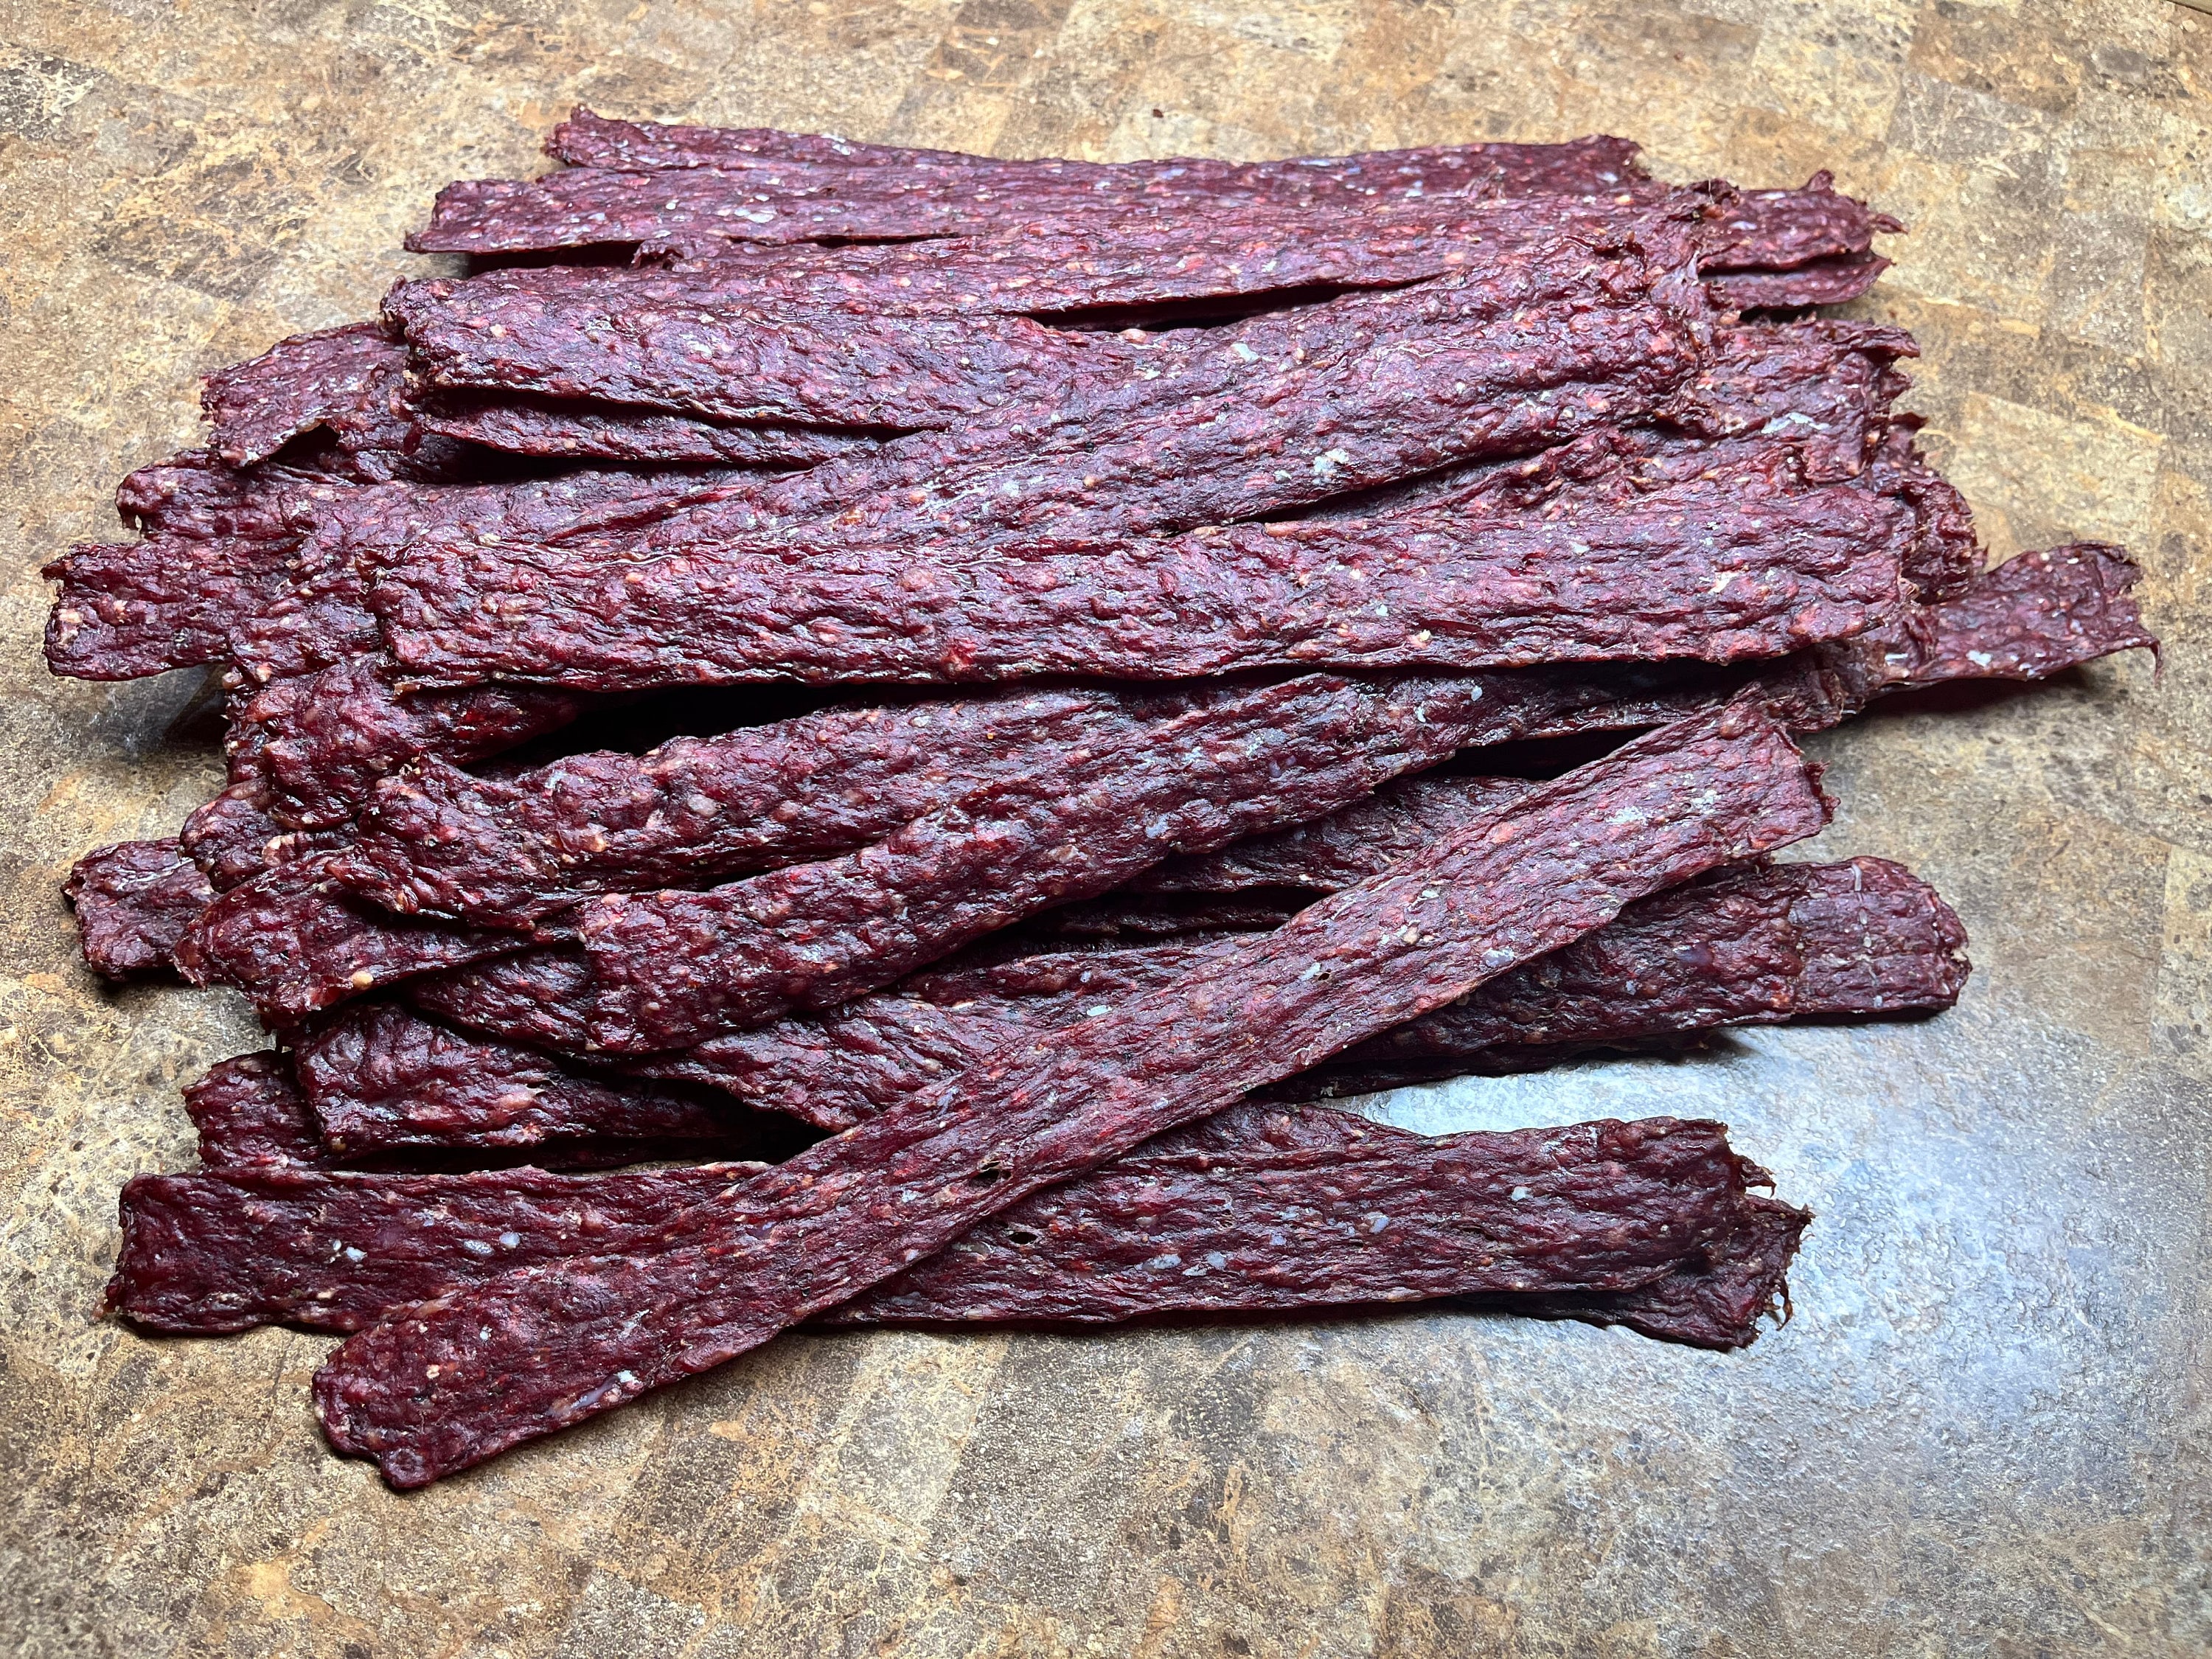 Simple and Easy! Jim's Beef Jerky Recipe